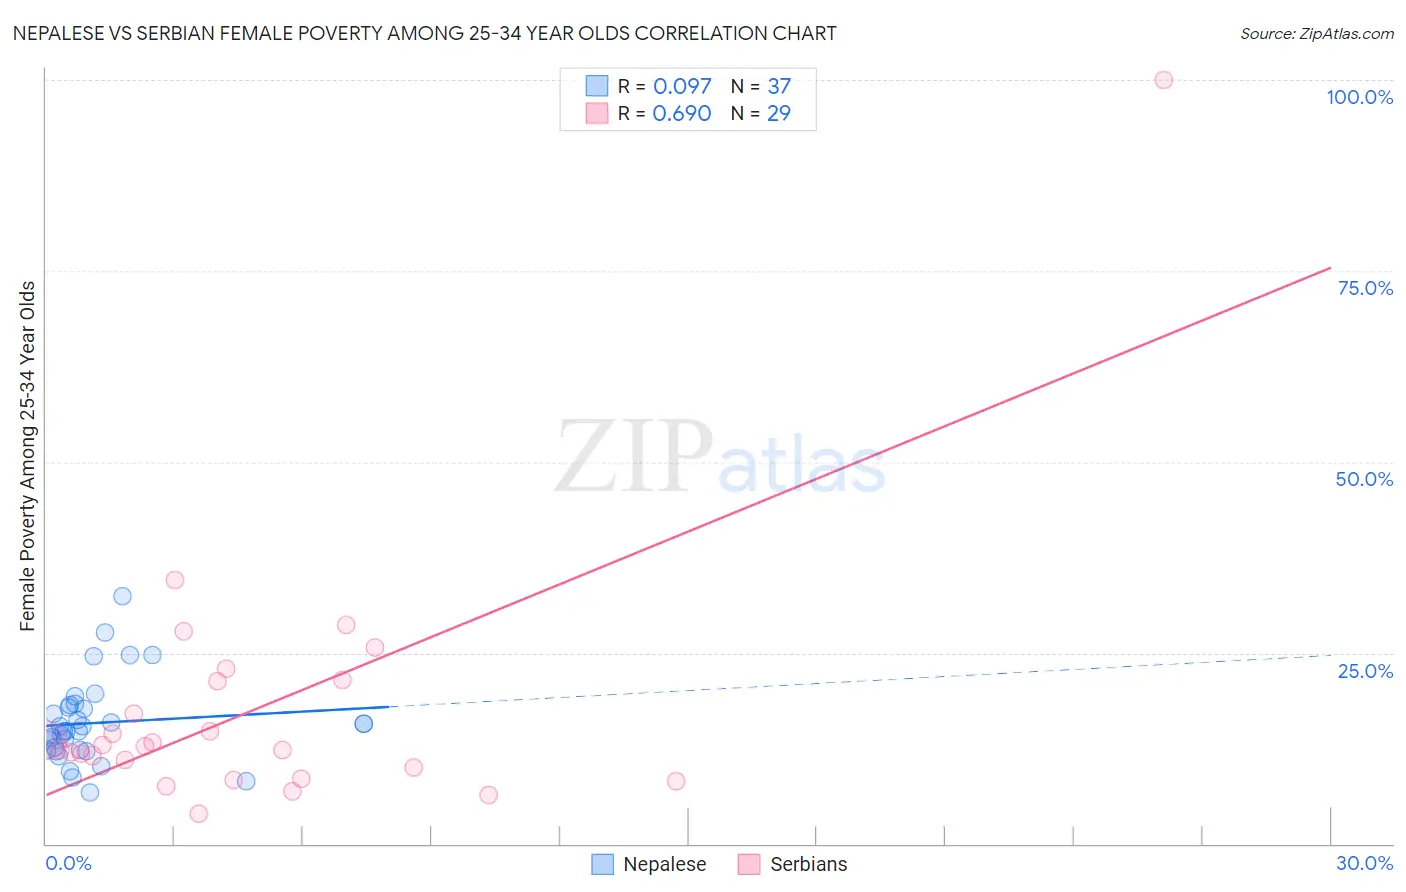 Nepalese vs Serbian Female Poverty Among 25-34 Year Olds